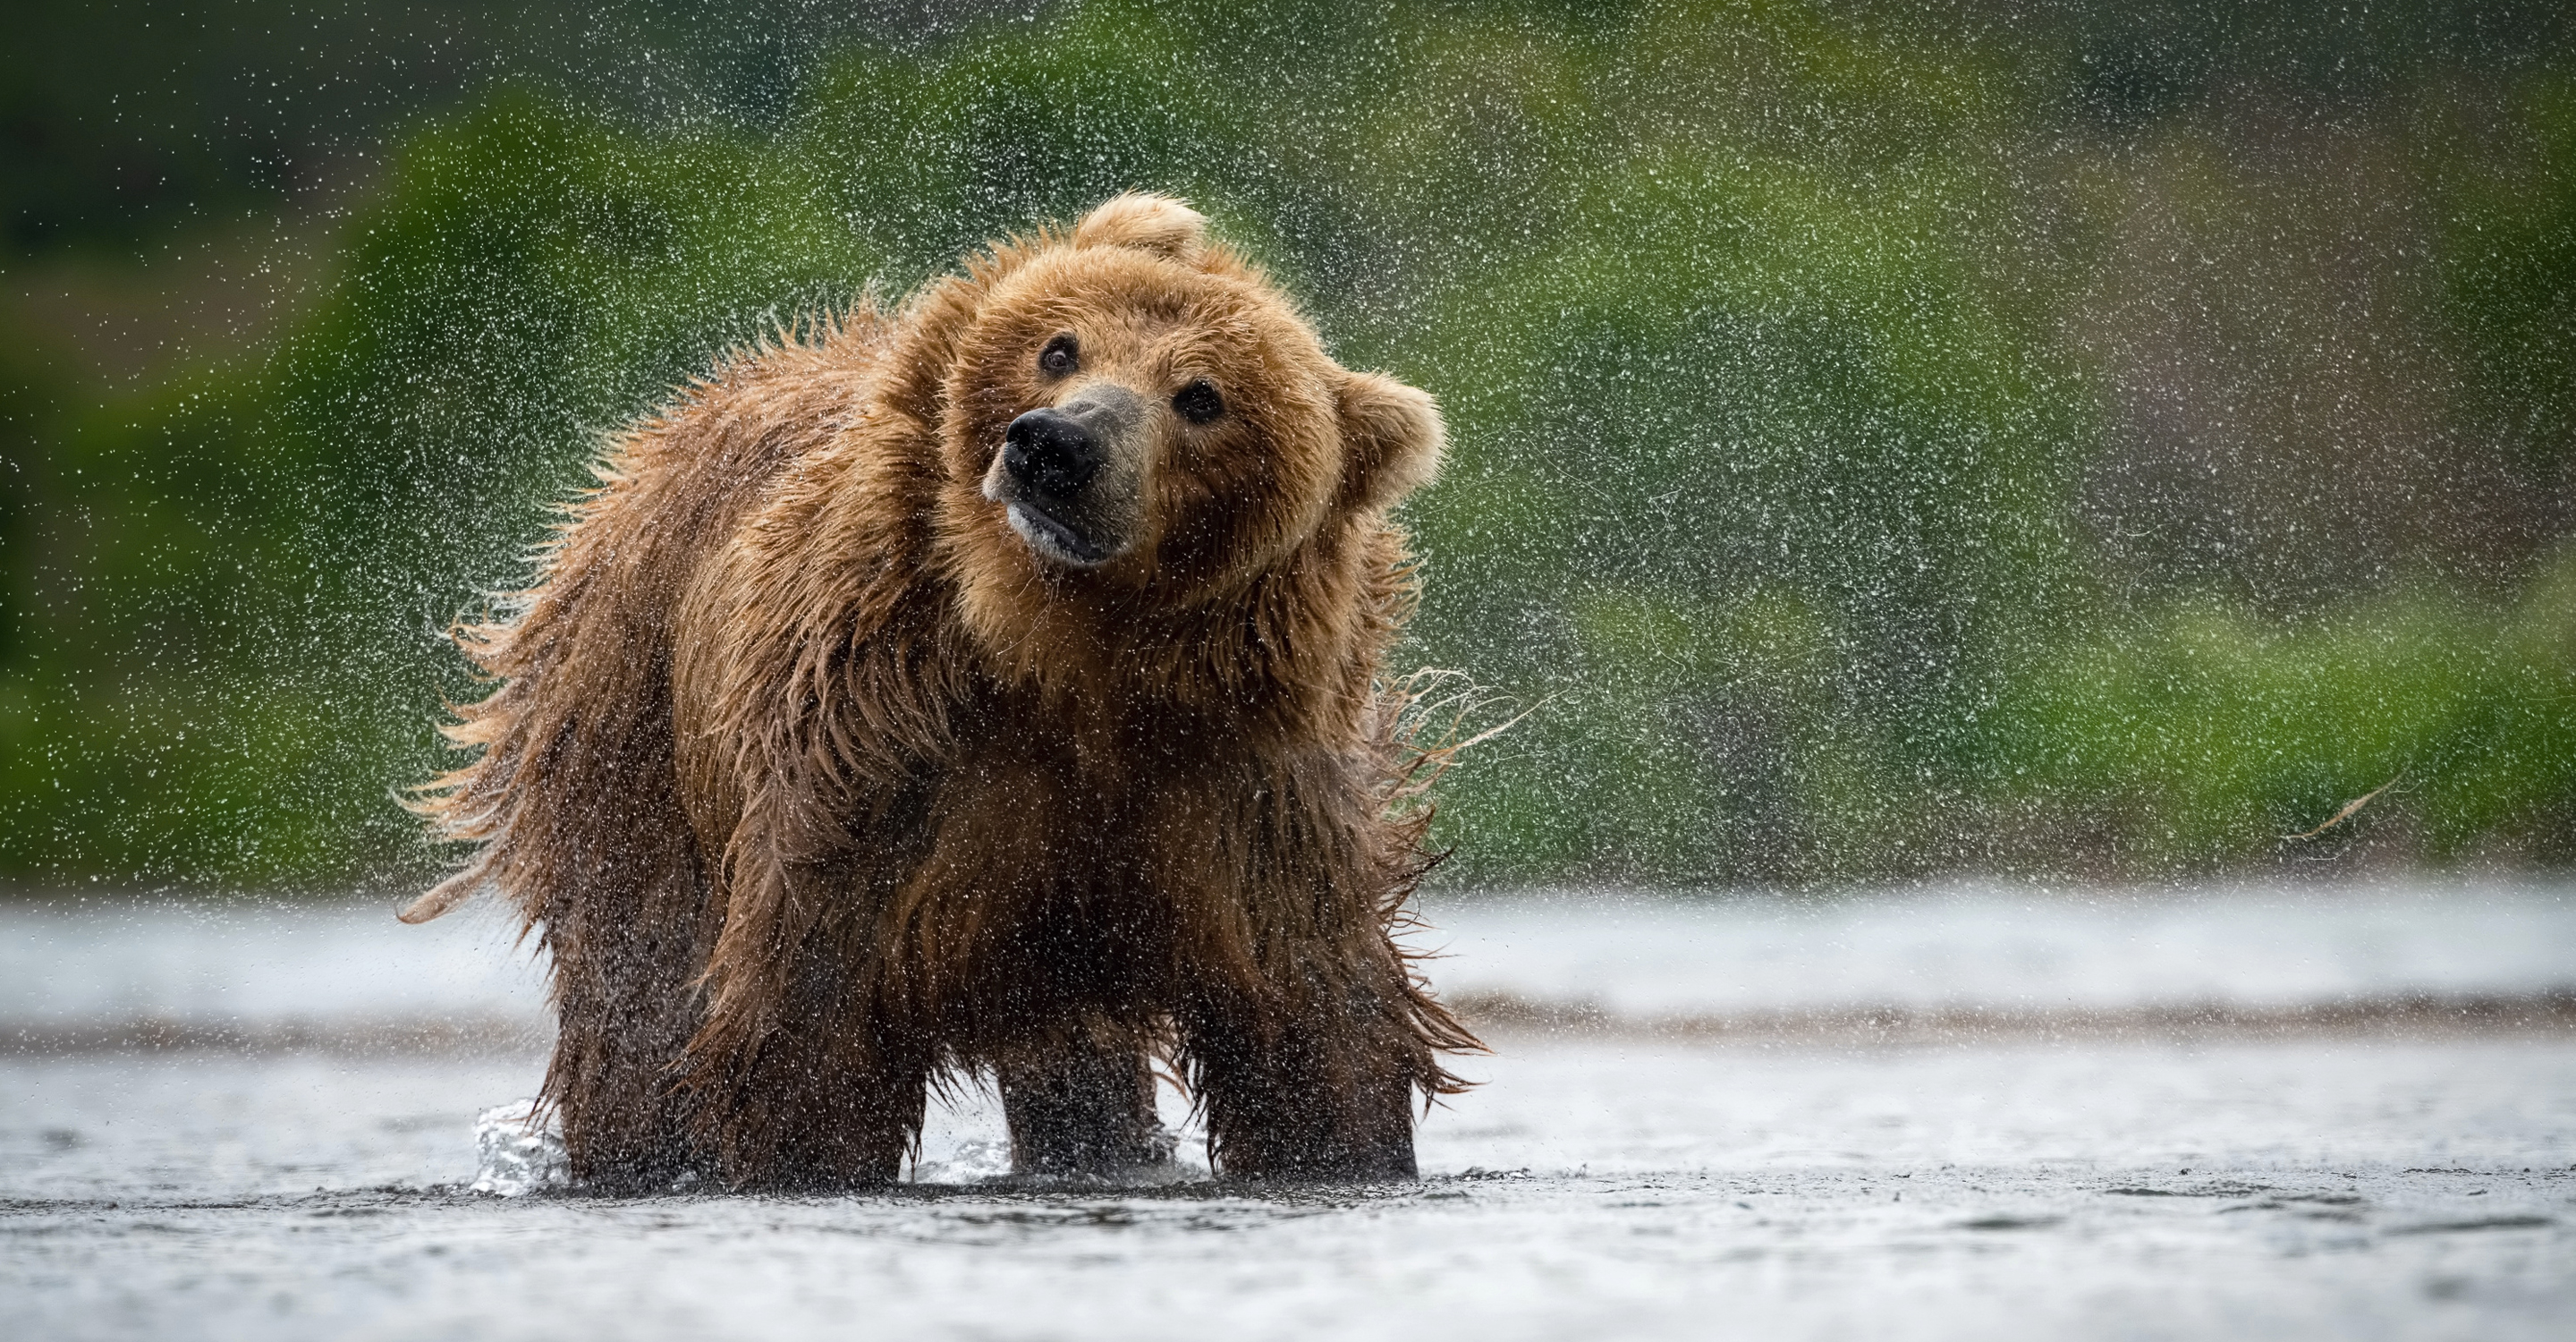 A brown bear shakes off in the water in Brooks Falls, Alaska, USA